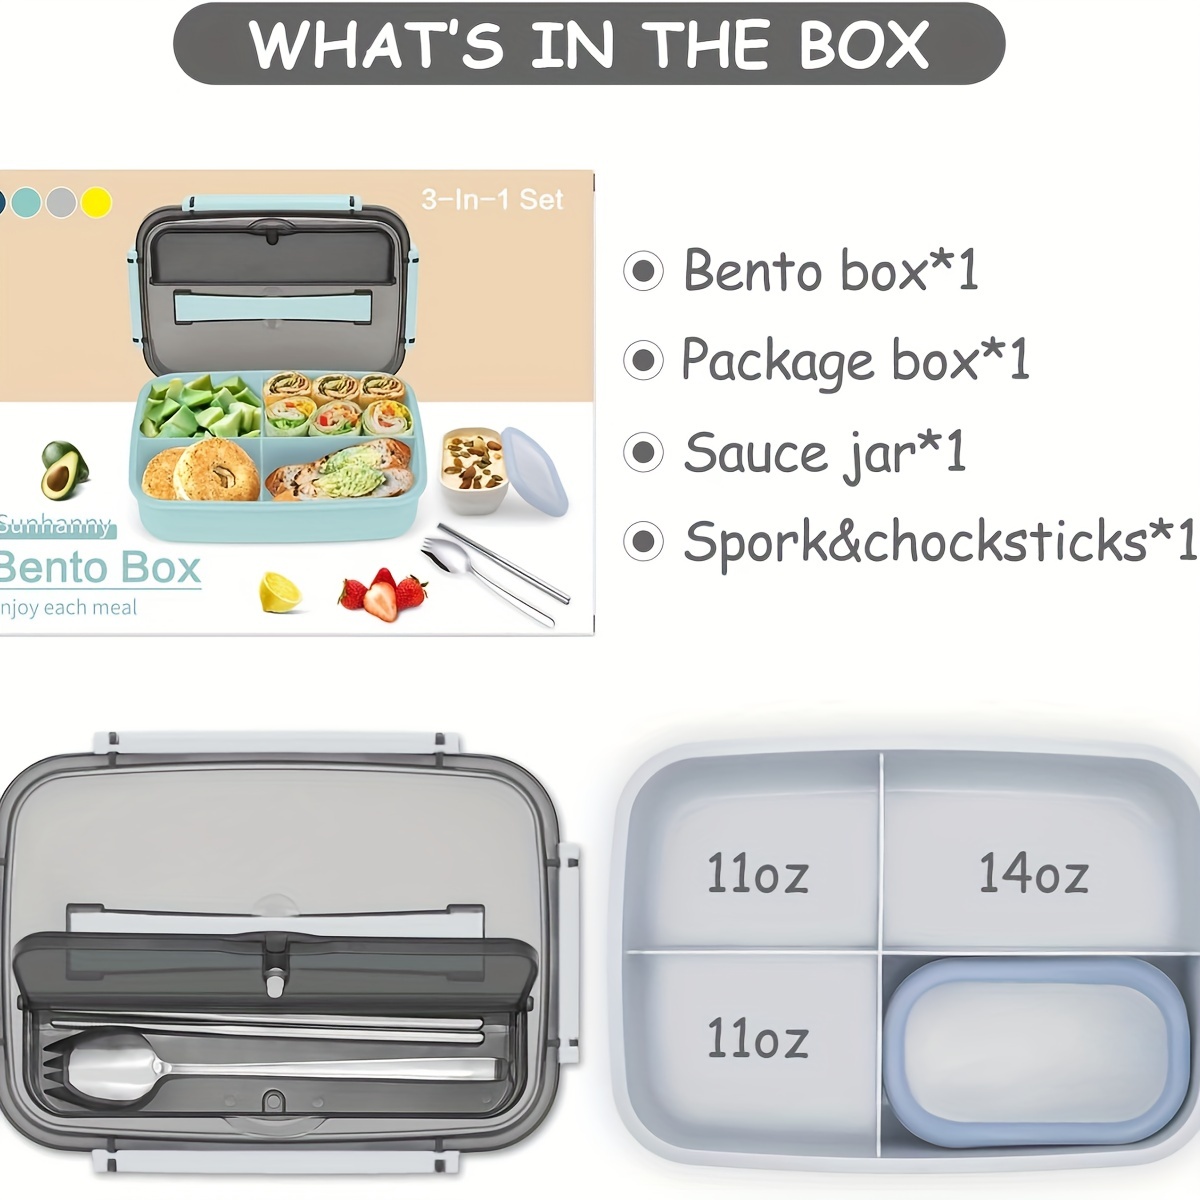 Sunhanny Bento Box Adult Lunch Box, Bento Lunch Box Containers, 50